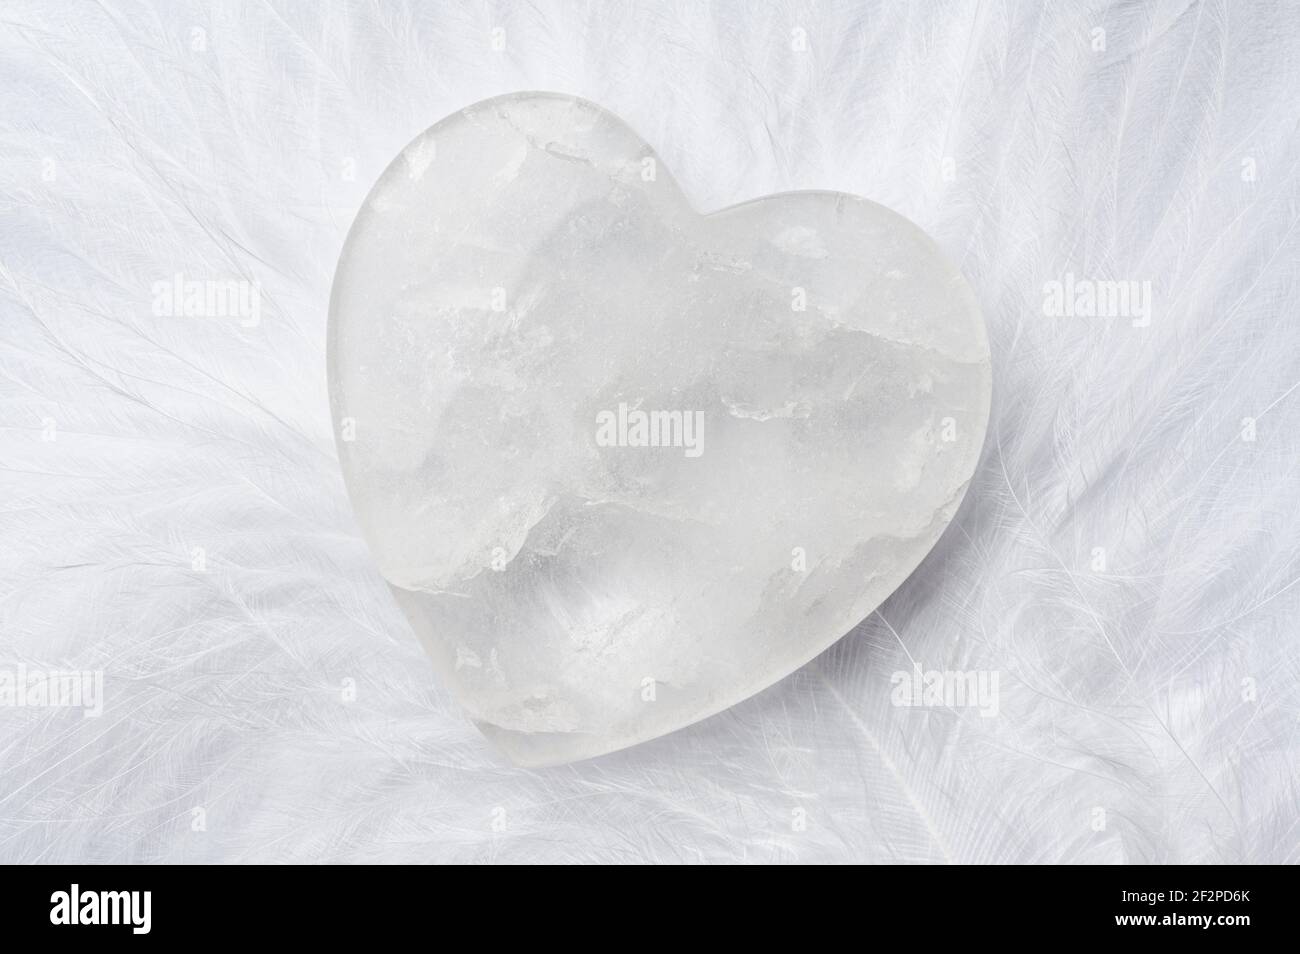 Rock crystal heart on white down feather, symbol of purity, innocence Stock Photo